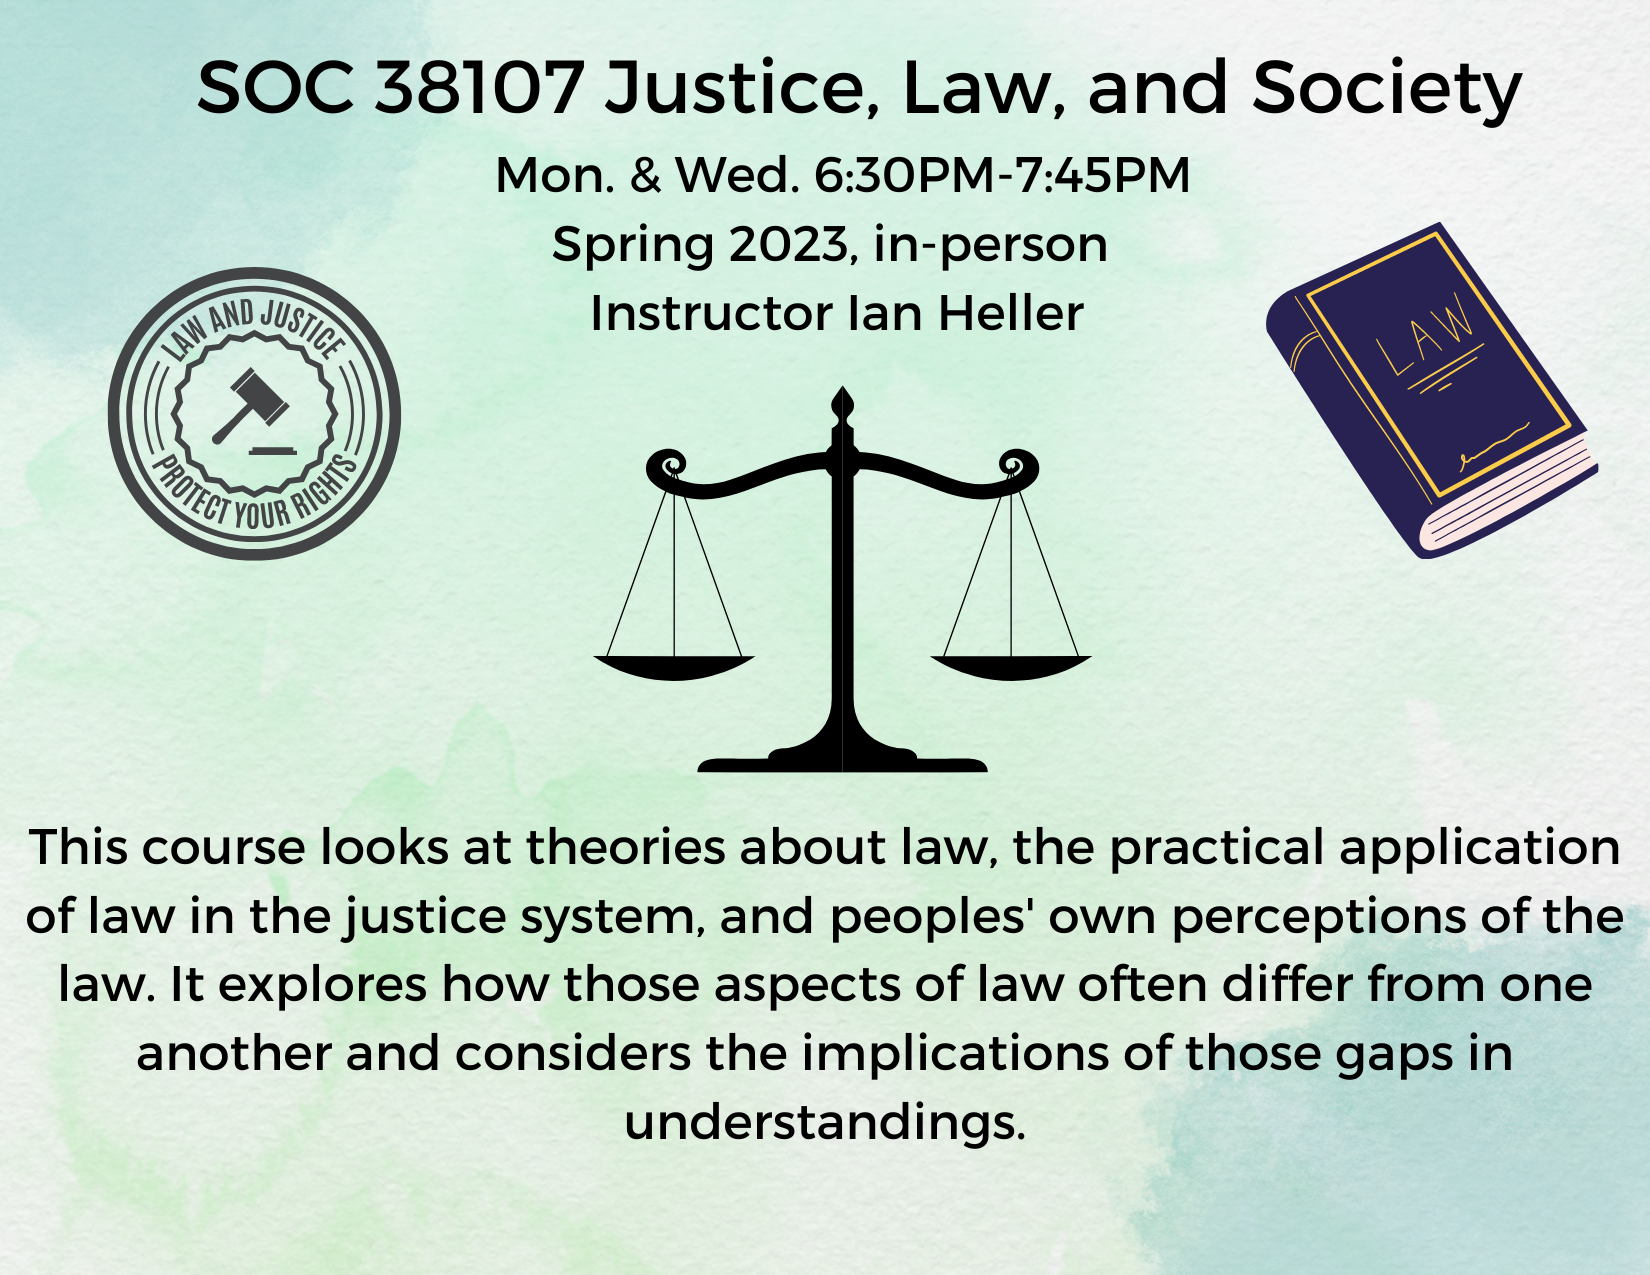 Colin Powell School CCNY Sociology SOC 38107 Justice, Law, and Society Course